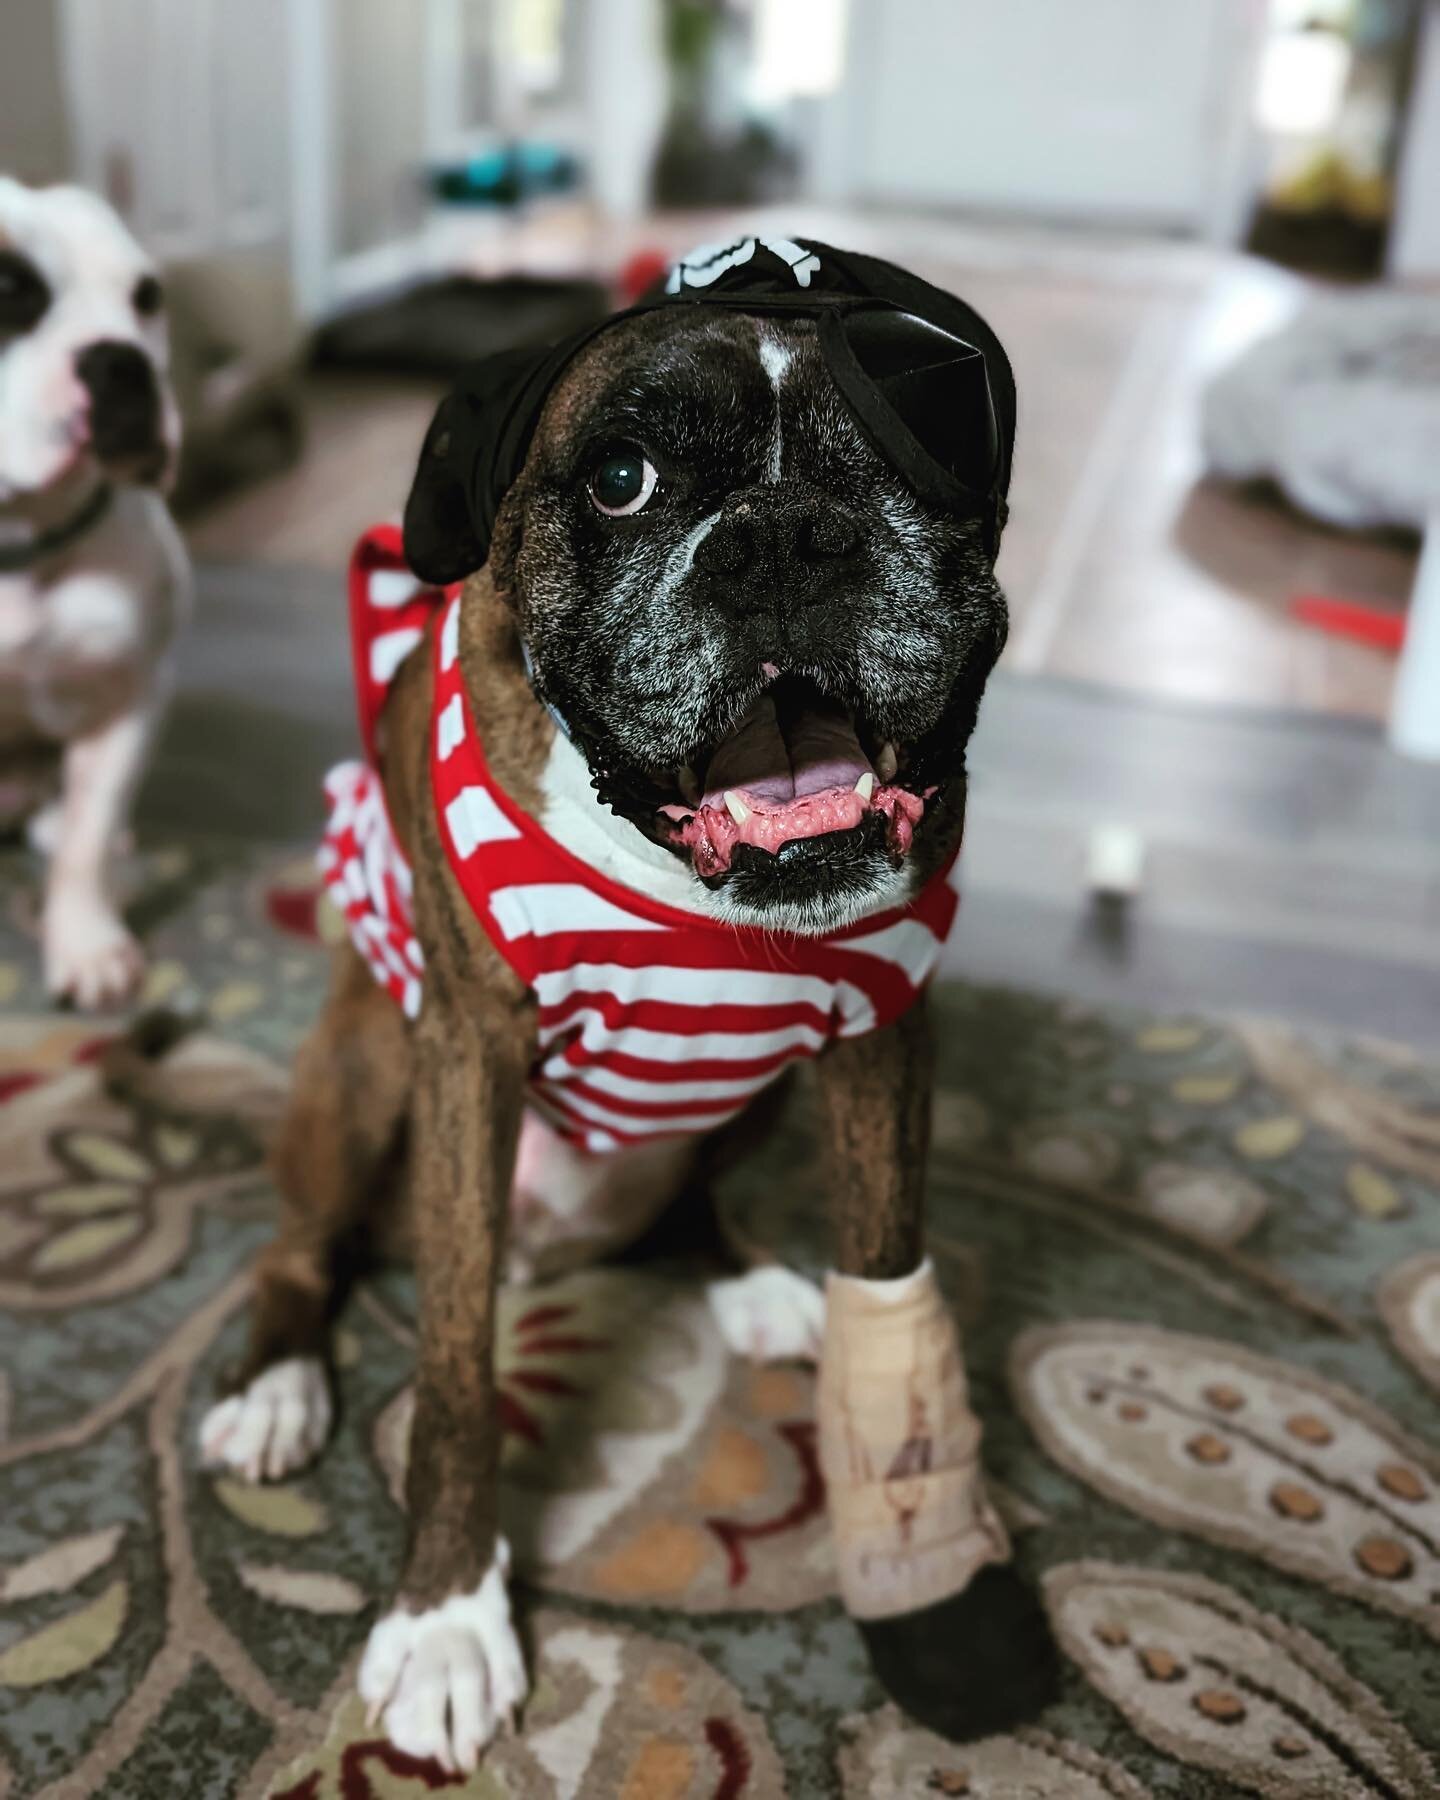 Toby&rsquo;s parents are making the best of his bandages! 

Introducing&hellip; Toby The Peg Leg Pirate!! 🏴&zwj;☠️🐾

#hanovervets #rva #rvapets #rvadogs #acvs #vetmed #vetlife #unicornclinic #dogsofinstagram #vetsurginfo #surgery #veterinary #pirat